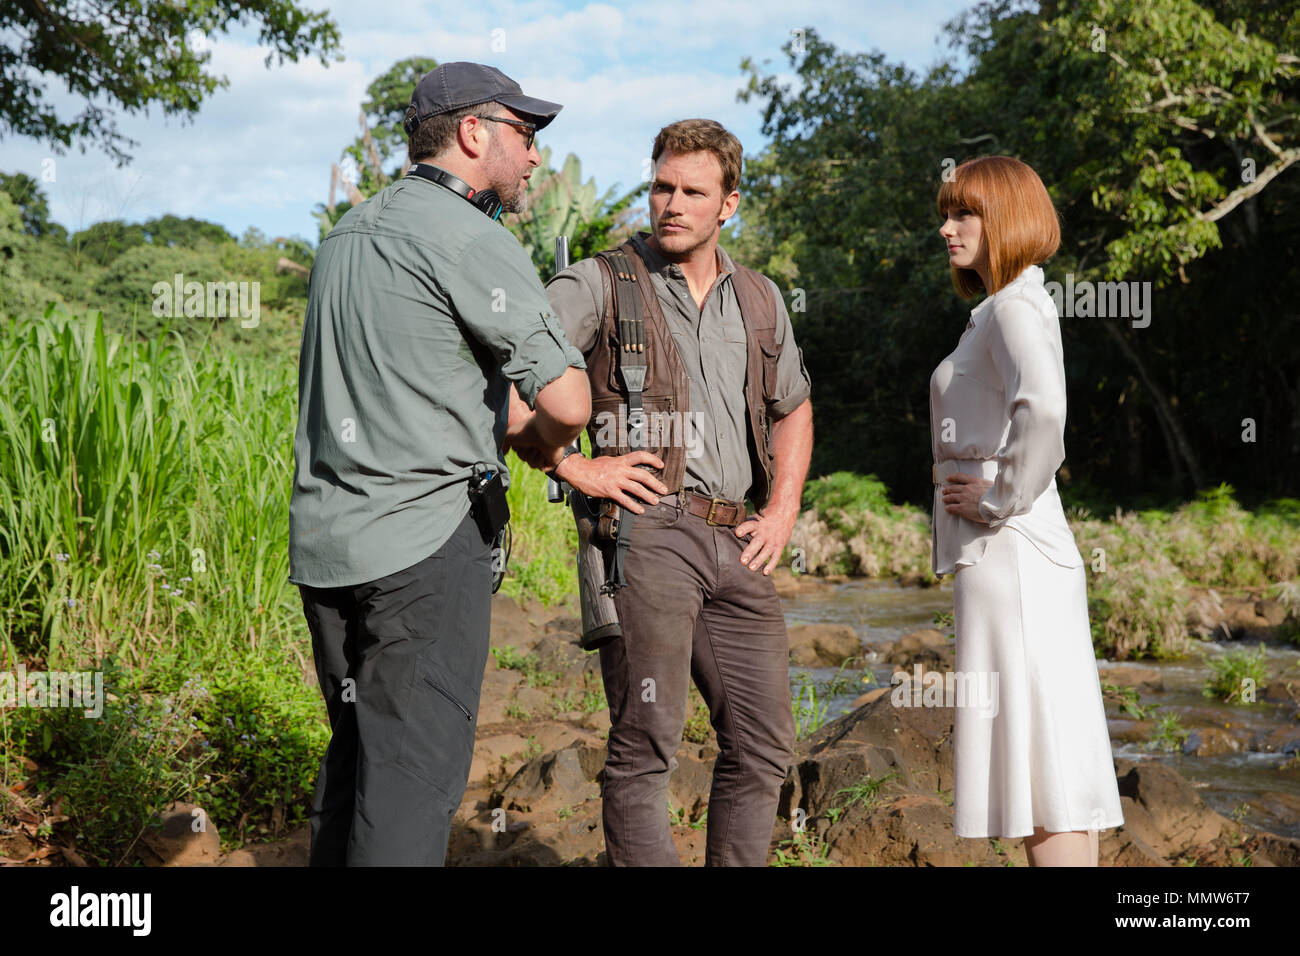 RELEASE DATE: June 12, 2015 TITLE: Jurassic World STUDIO: Universal Pictures DIRECTOR: COLIN TREVORROW PLOT: A new theme park, built on the original site of Jurassic Park, creates a genetically modified hybrid dinosaur, which escapes containment and goes on a killing spree. STARRING: CHRIS PRATT, BRYCE DALLAS HOWARD. (Credit Image: © Universal Pictures/Entertainment Pictures) Stock Photo